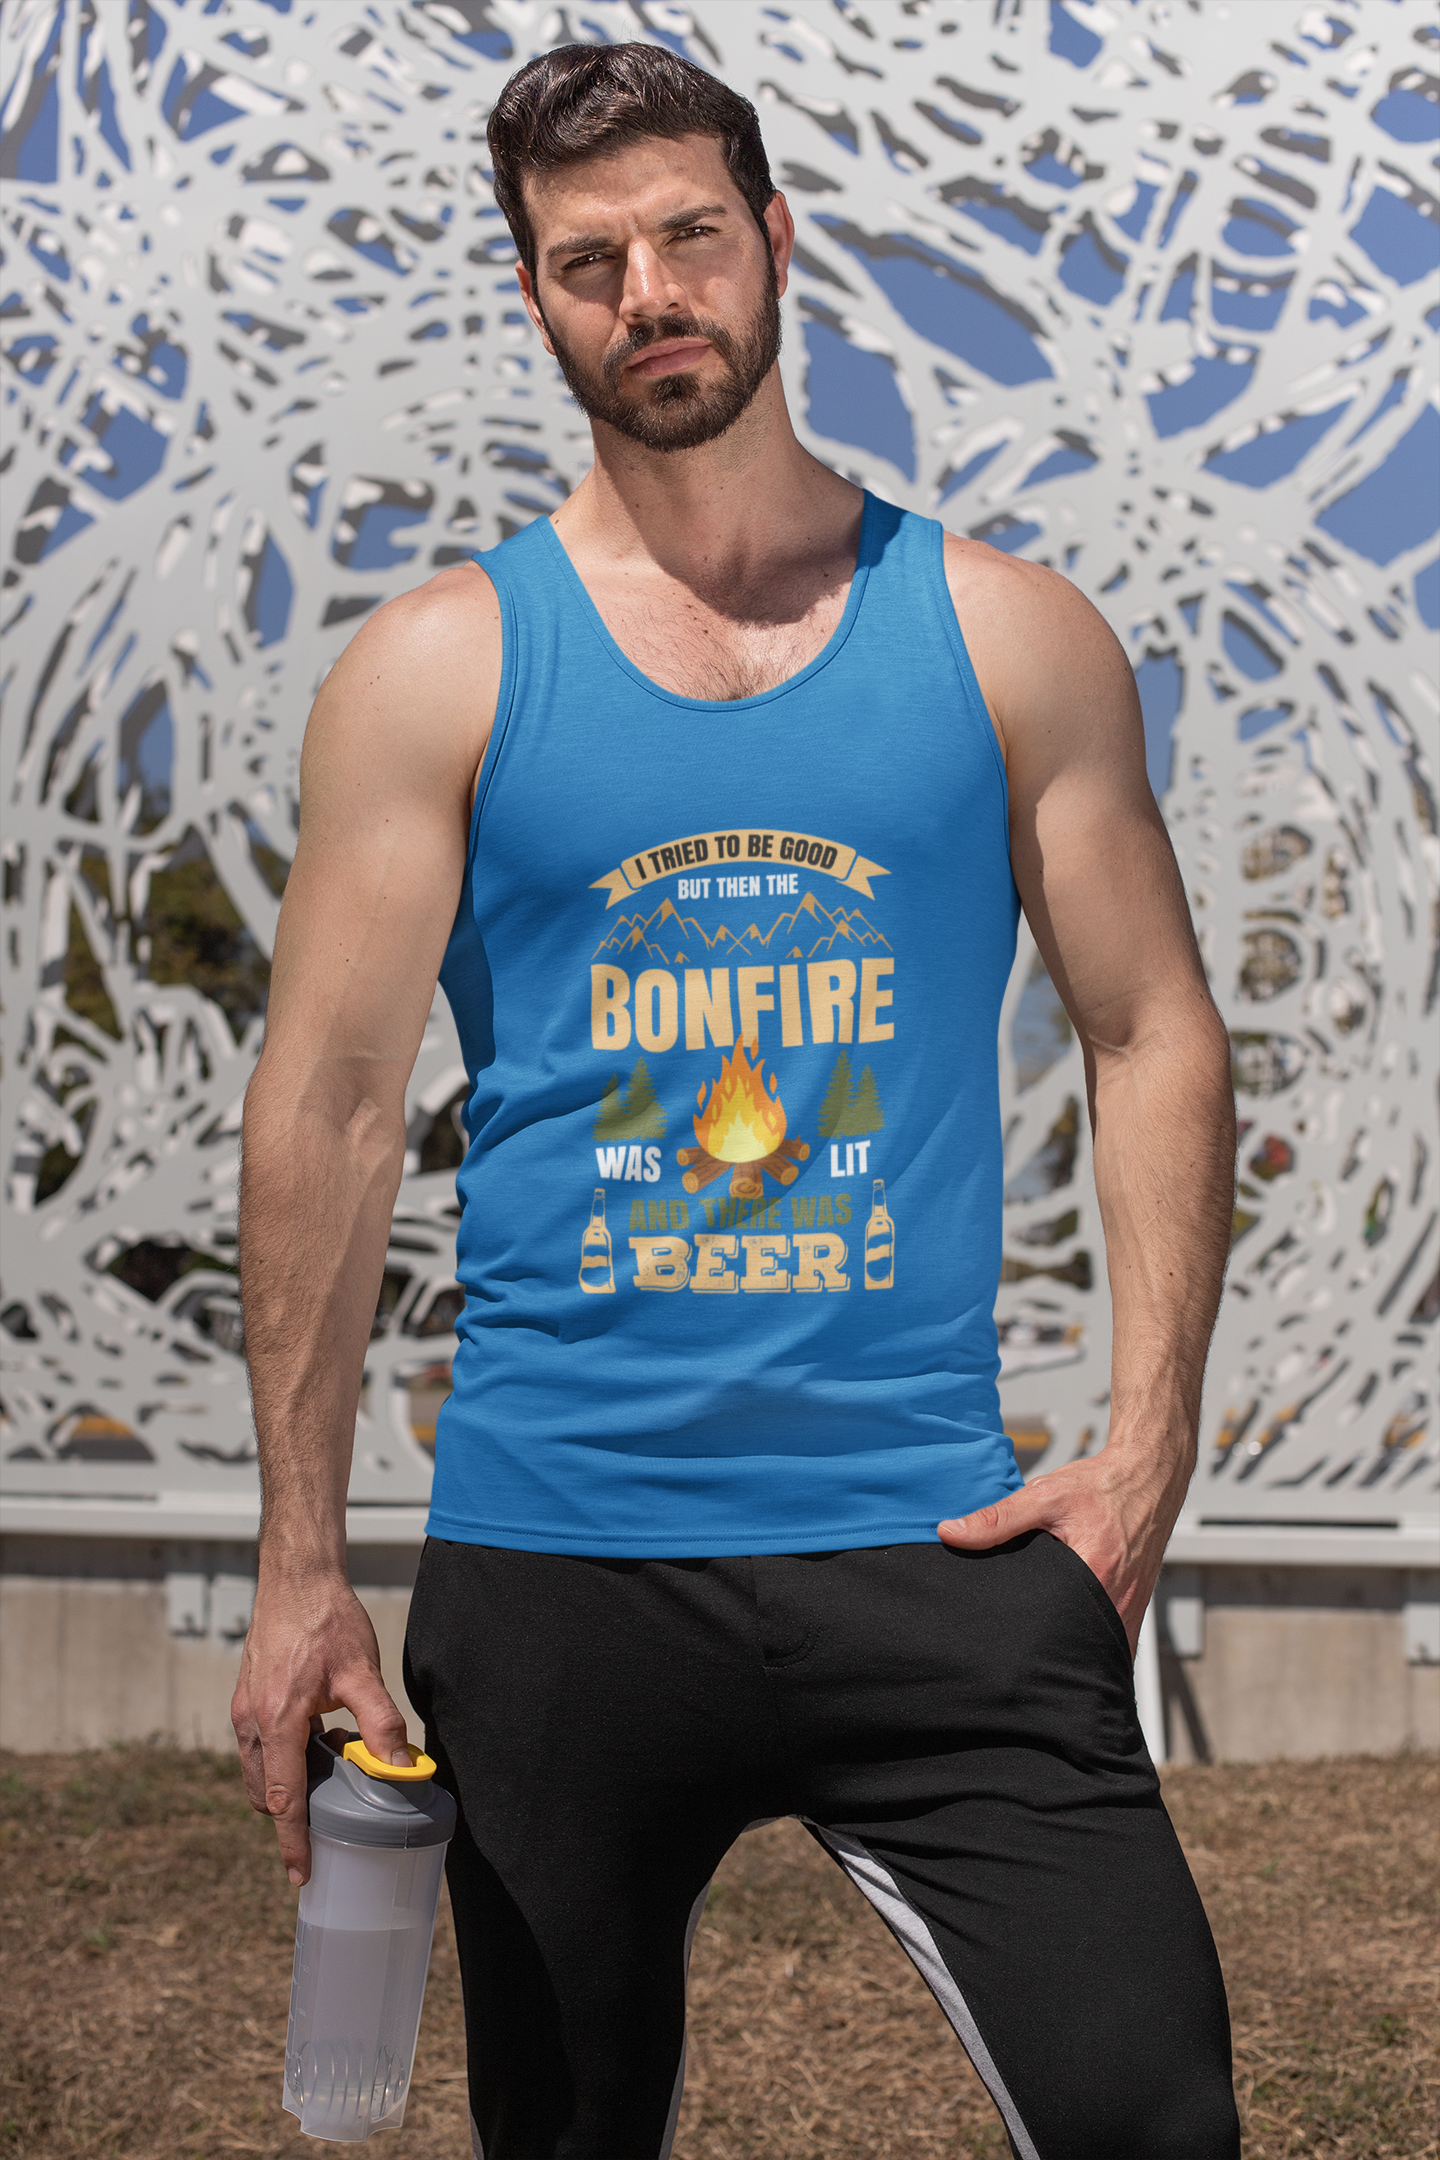 I tried to be good bonfire & beer; Soft 100% cotton tank top. Removable tag for comfort